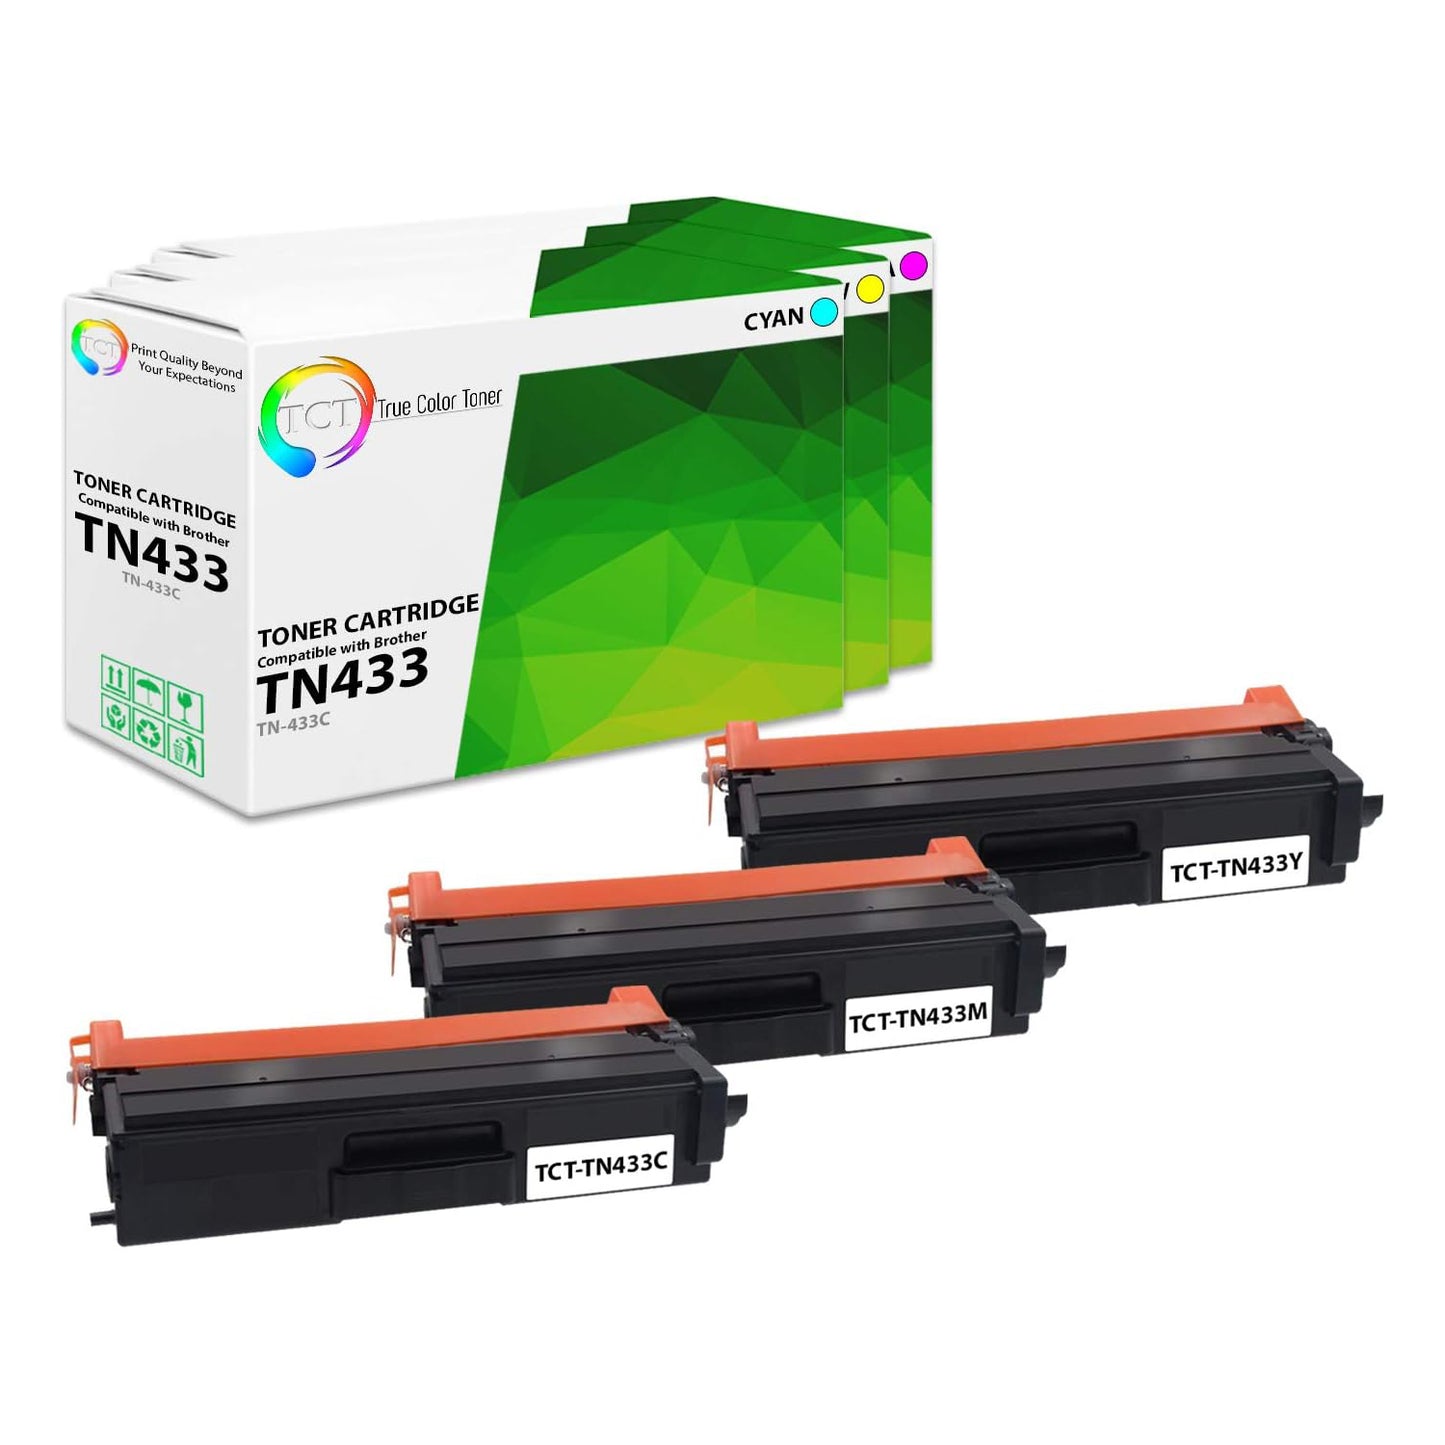 TCT Compatible HY Toner Cartridge Replacement for the Brother TN433 Series - 3 Pack (C, M, Y)